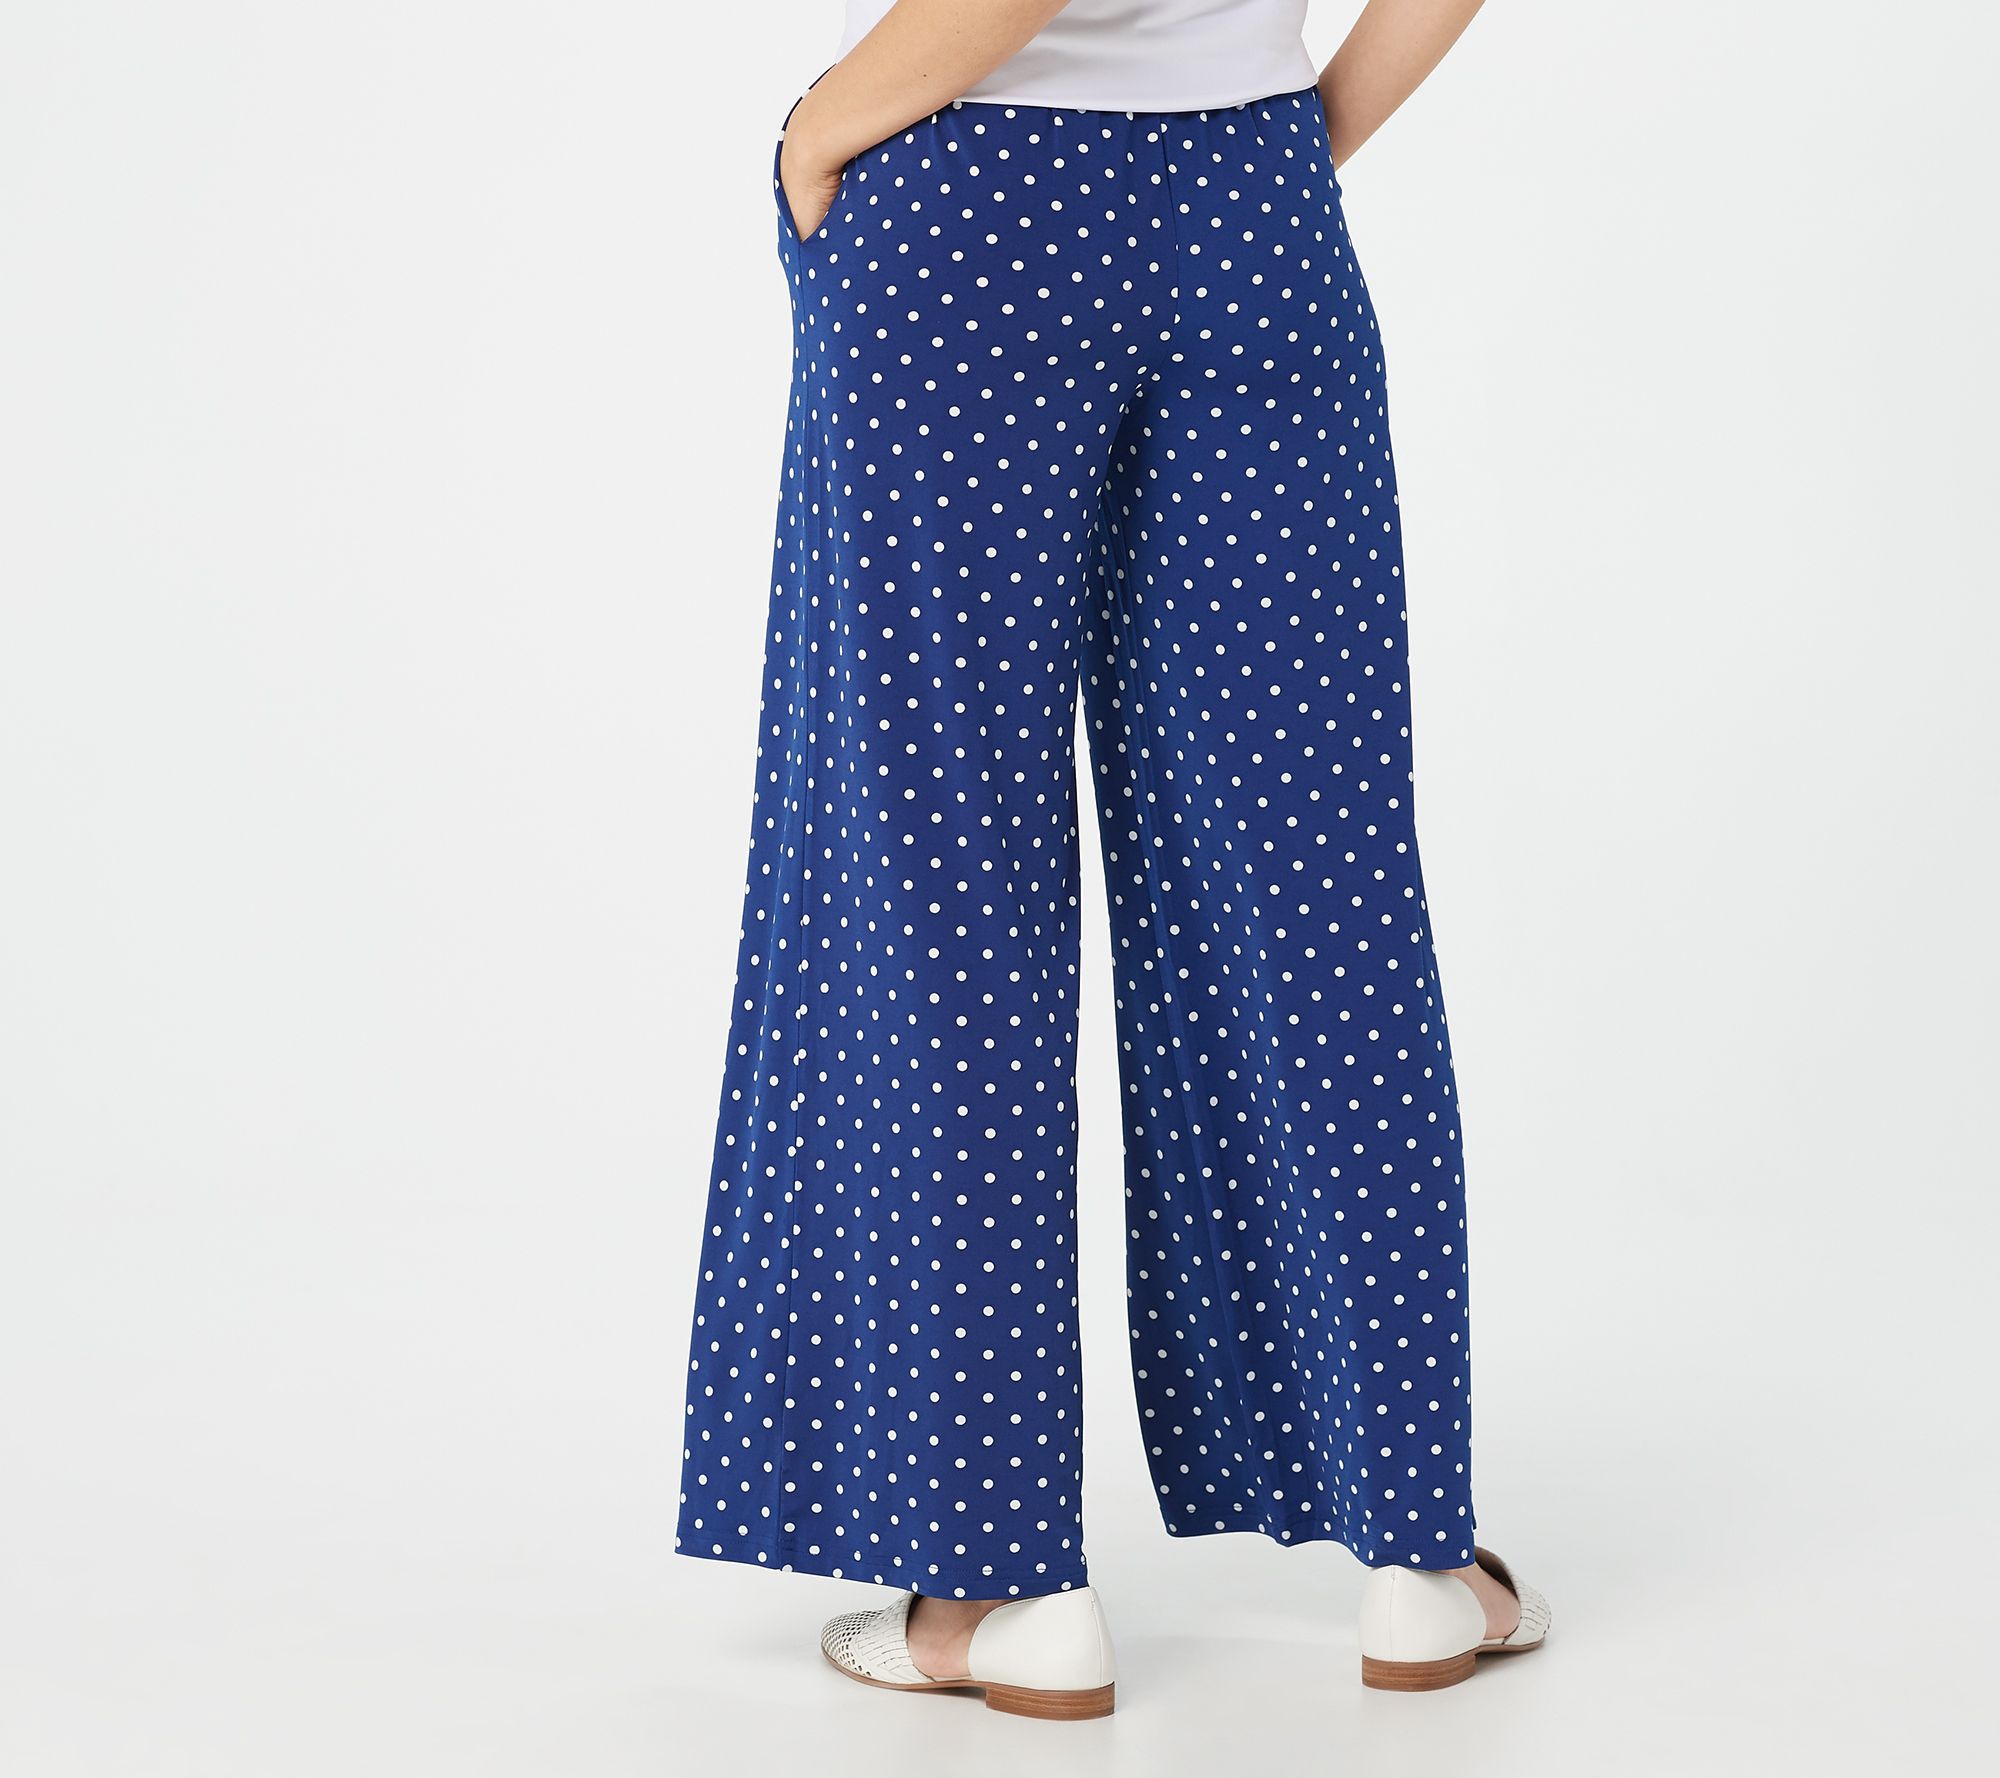 From Desk to Drinks: Polka Dots + Ponte Pants ($30 OUTFIT!)